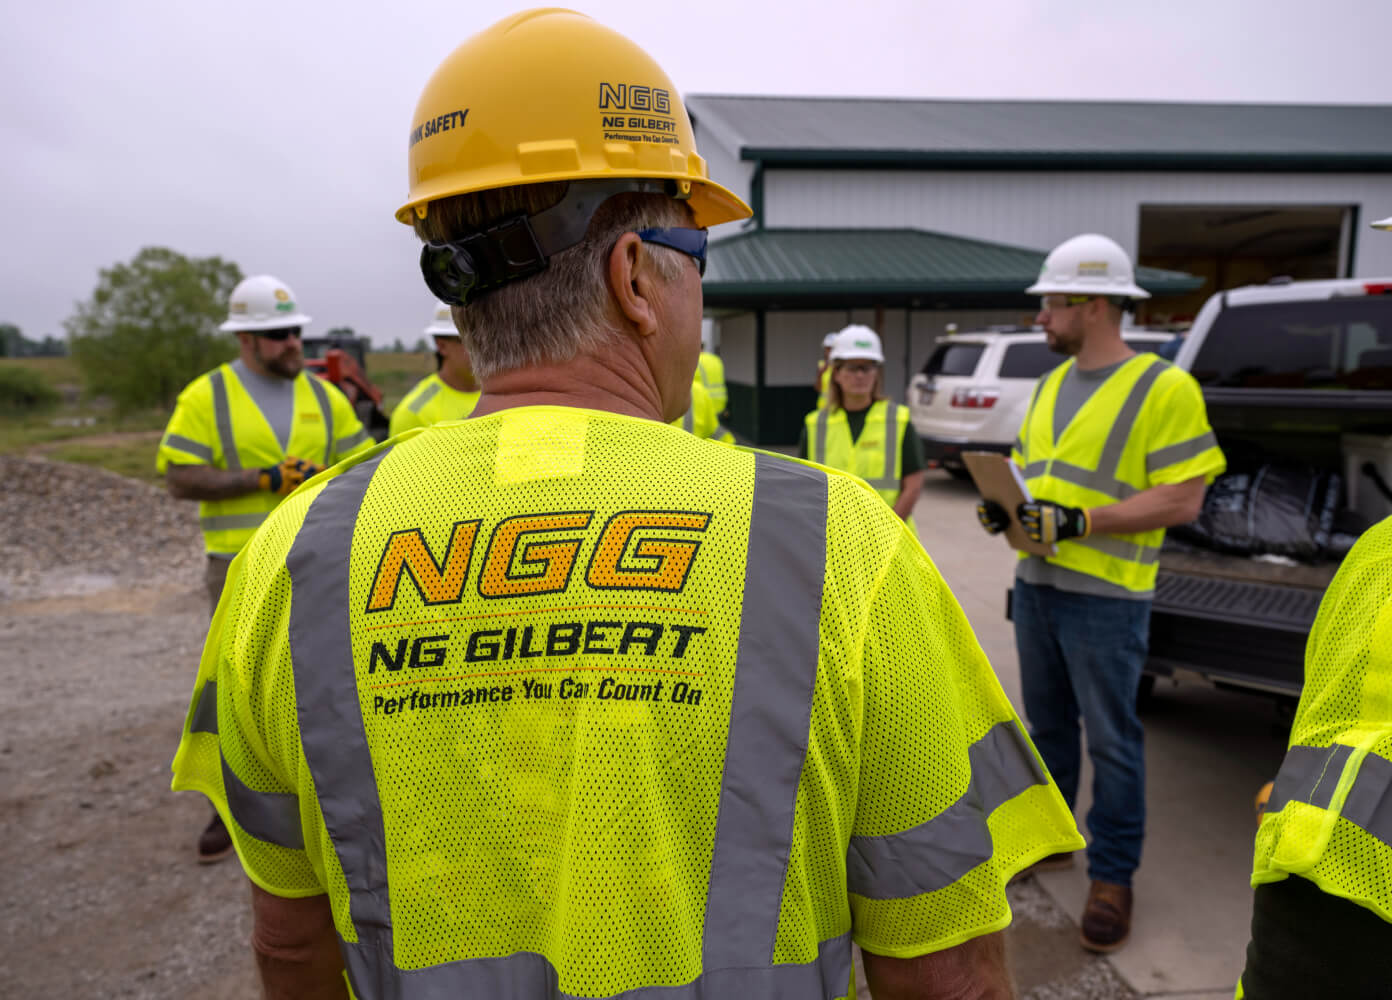 An NG Gilbert crew member with his back turned to the camera and facing other team members. All wear safety vests and hard hats as they stand outside a job site.